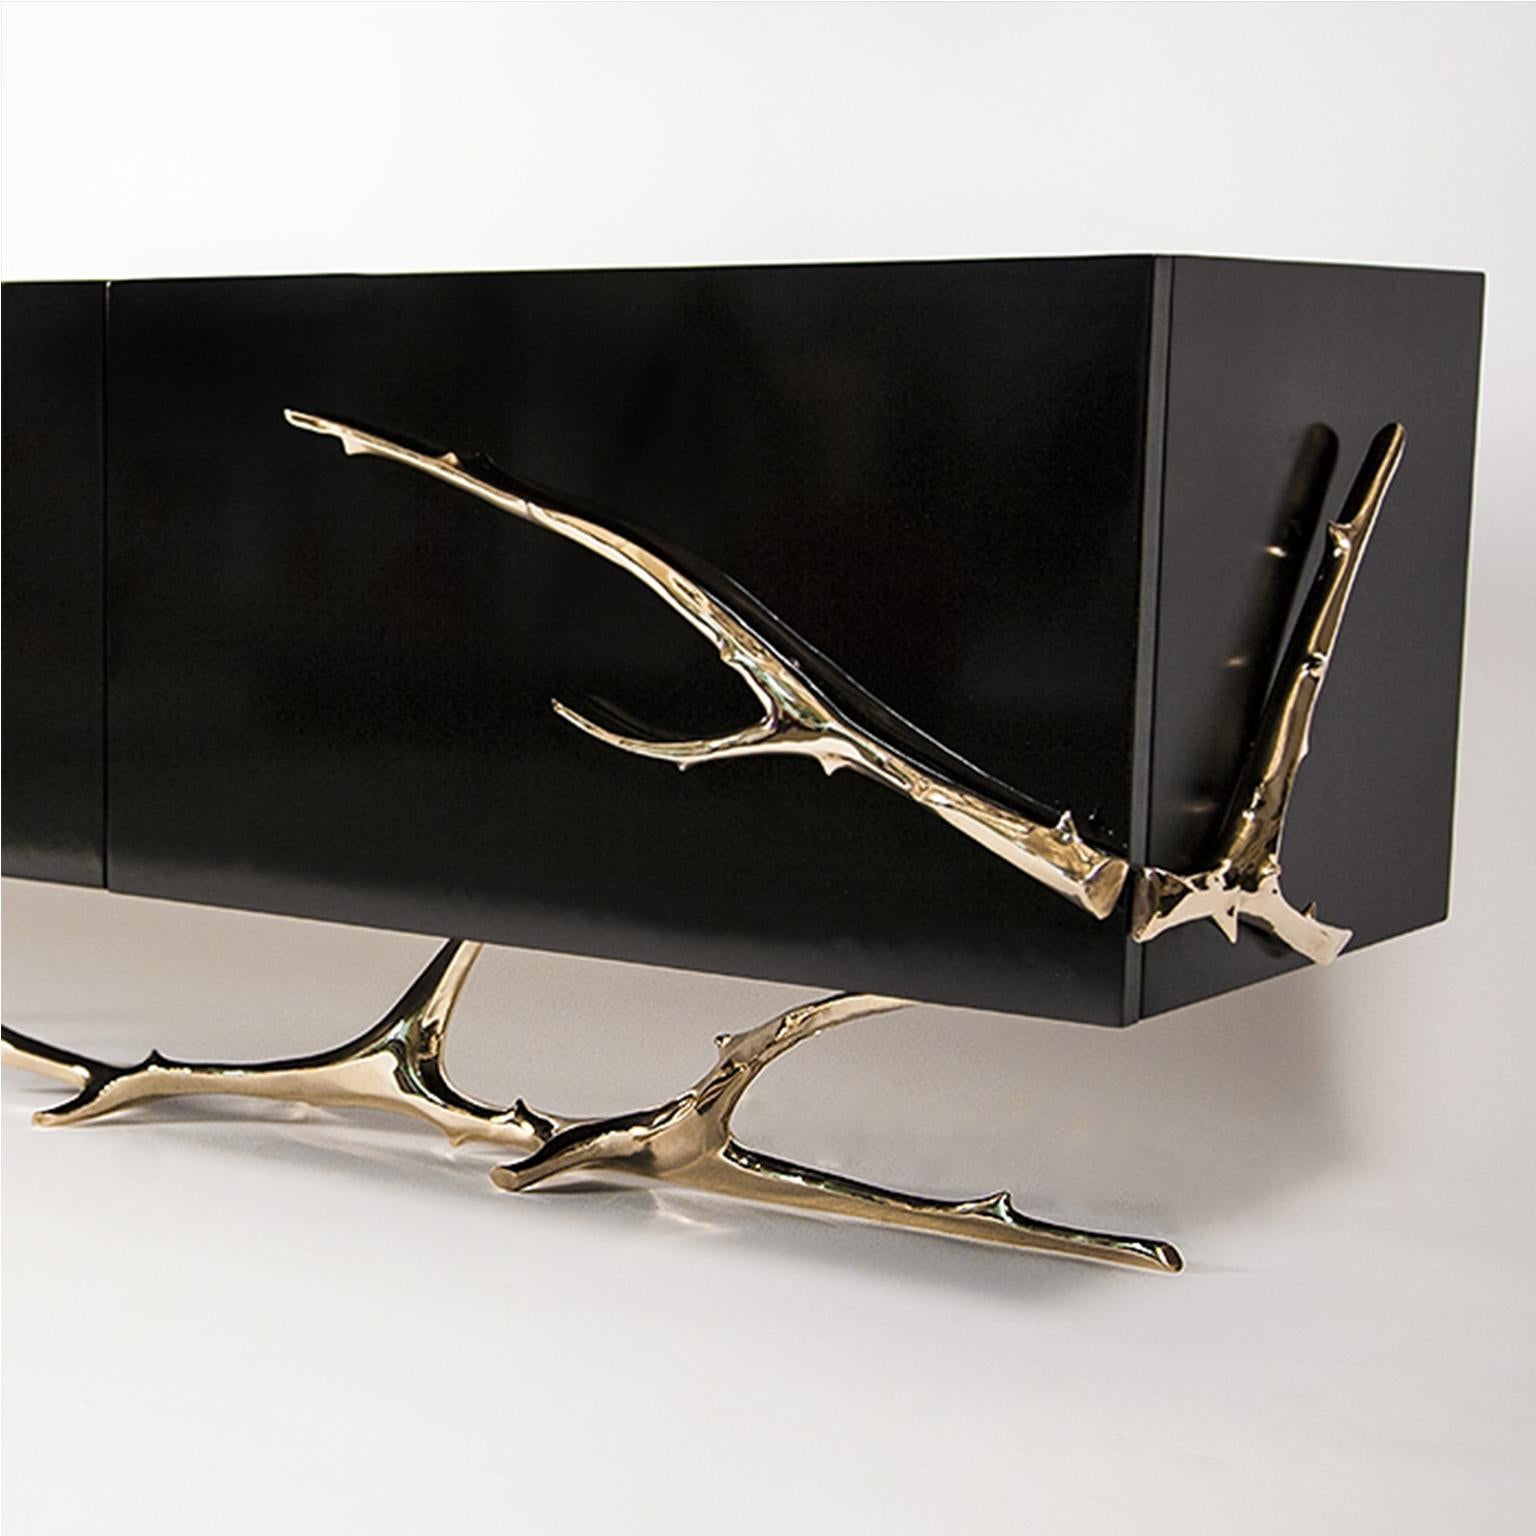 The Meta Credenza by Barlas Baylar is a functional objet d’art comprised of a Piano Black Lacquer case elegantly cradled by branches of Polished Bronze or Stainless Steel.  The result is the decadent Meta Credenza that elevates the ambiance of its